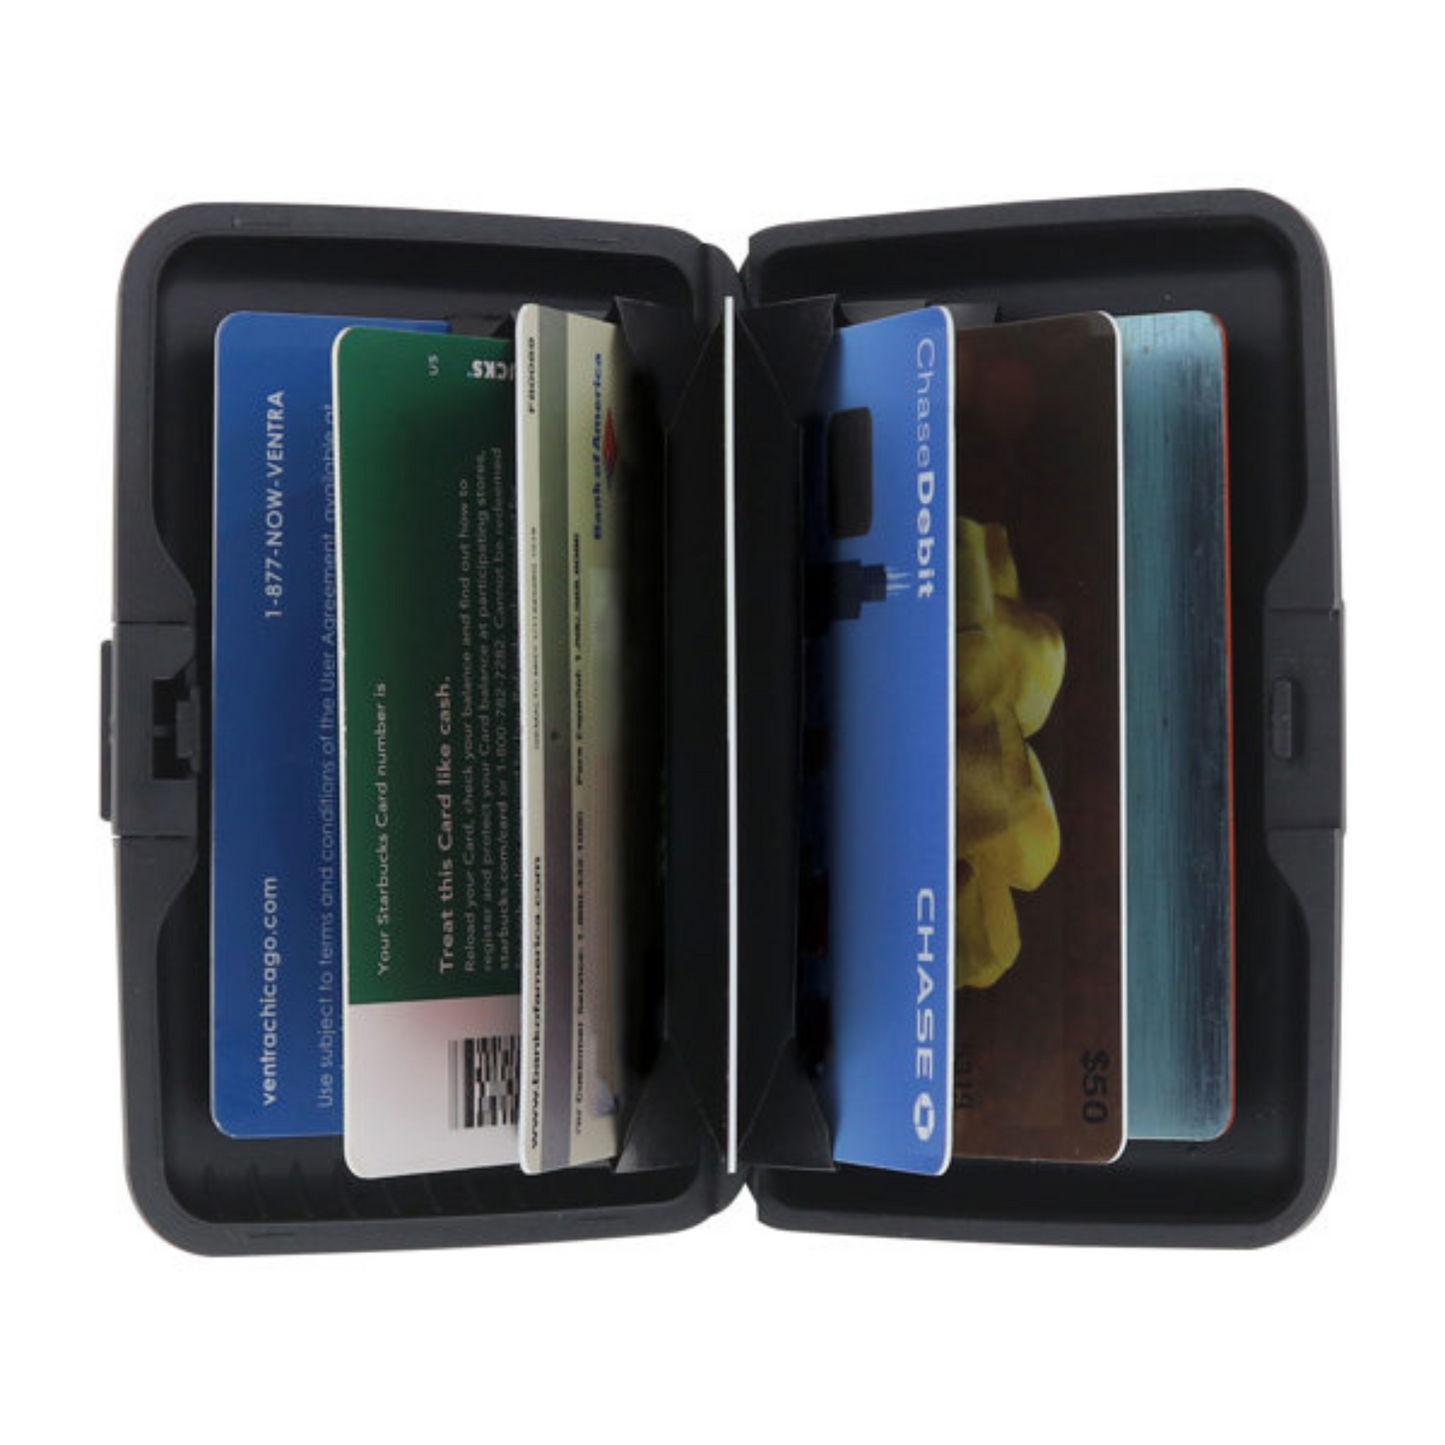 scan safe security wallet. available in teal, burgundy, stone, grey, black, lime